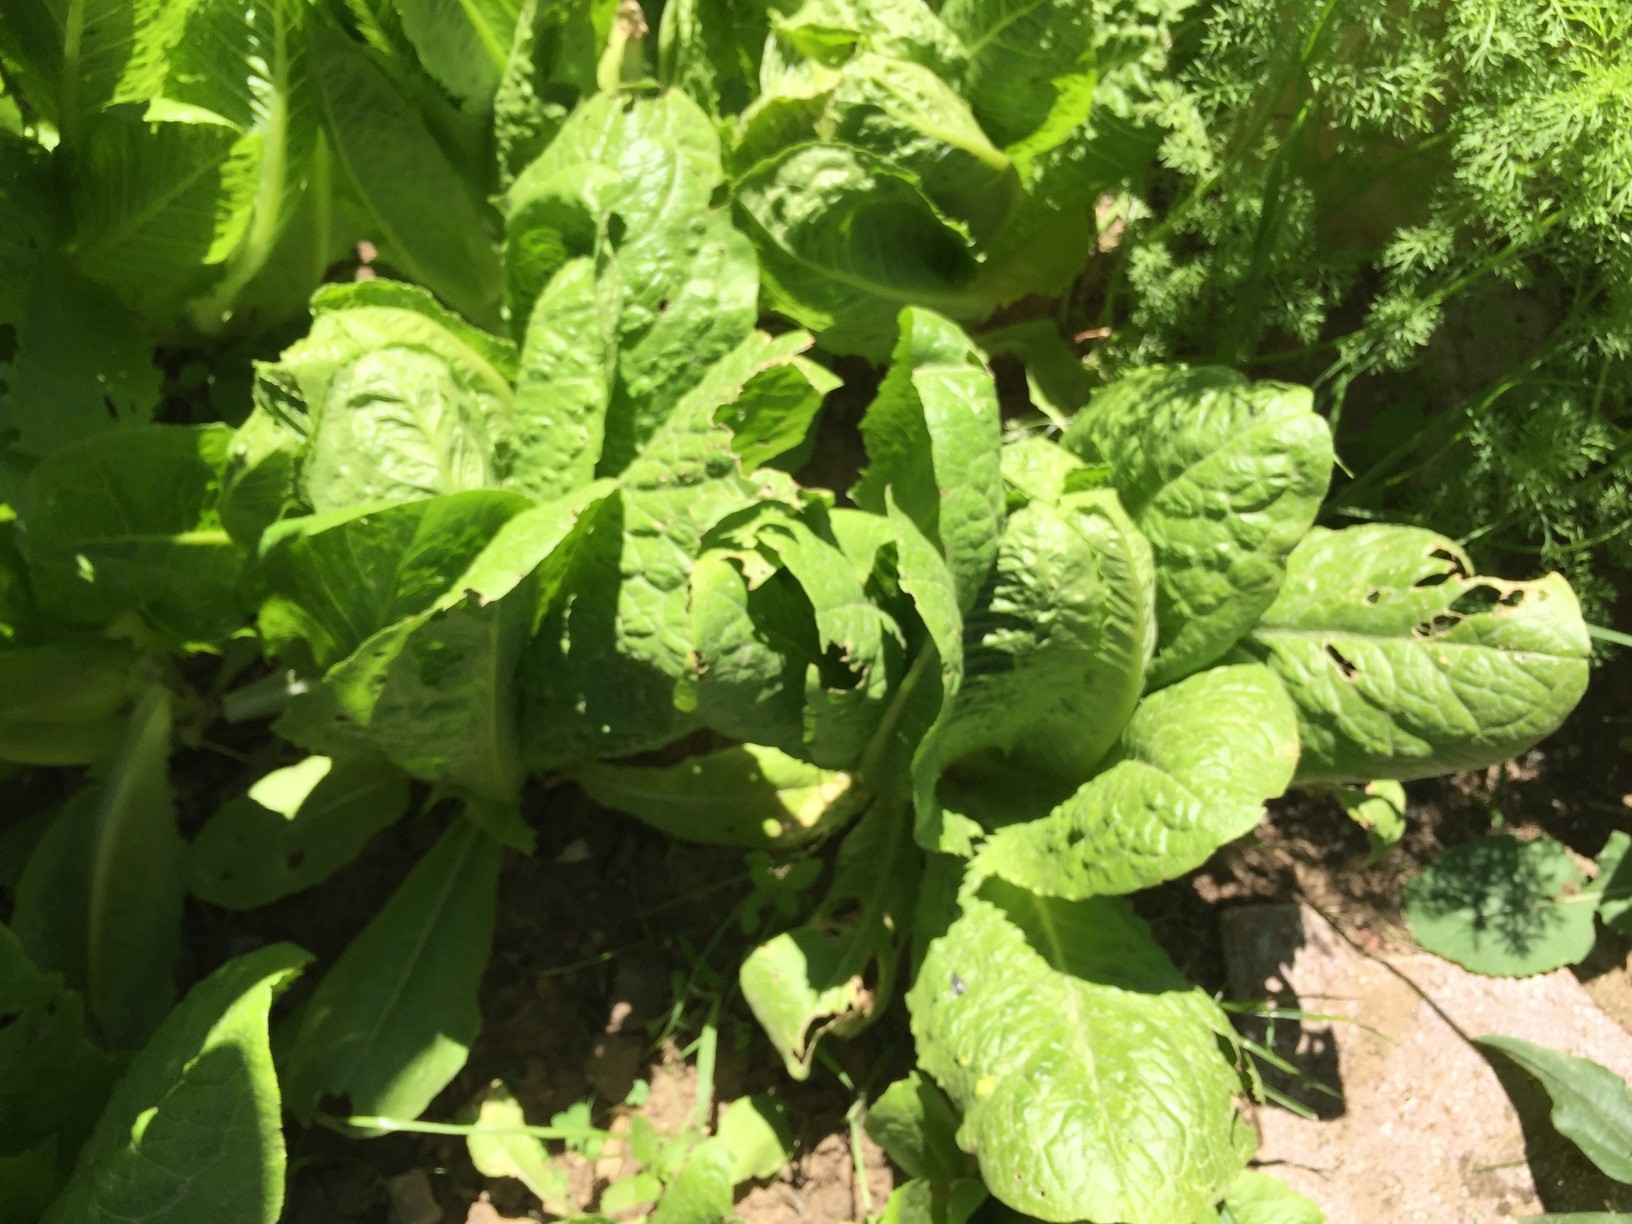 my organic romaine lettuce are ready to be harvested